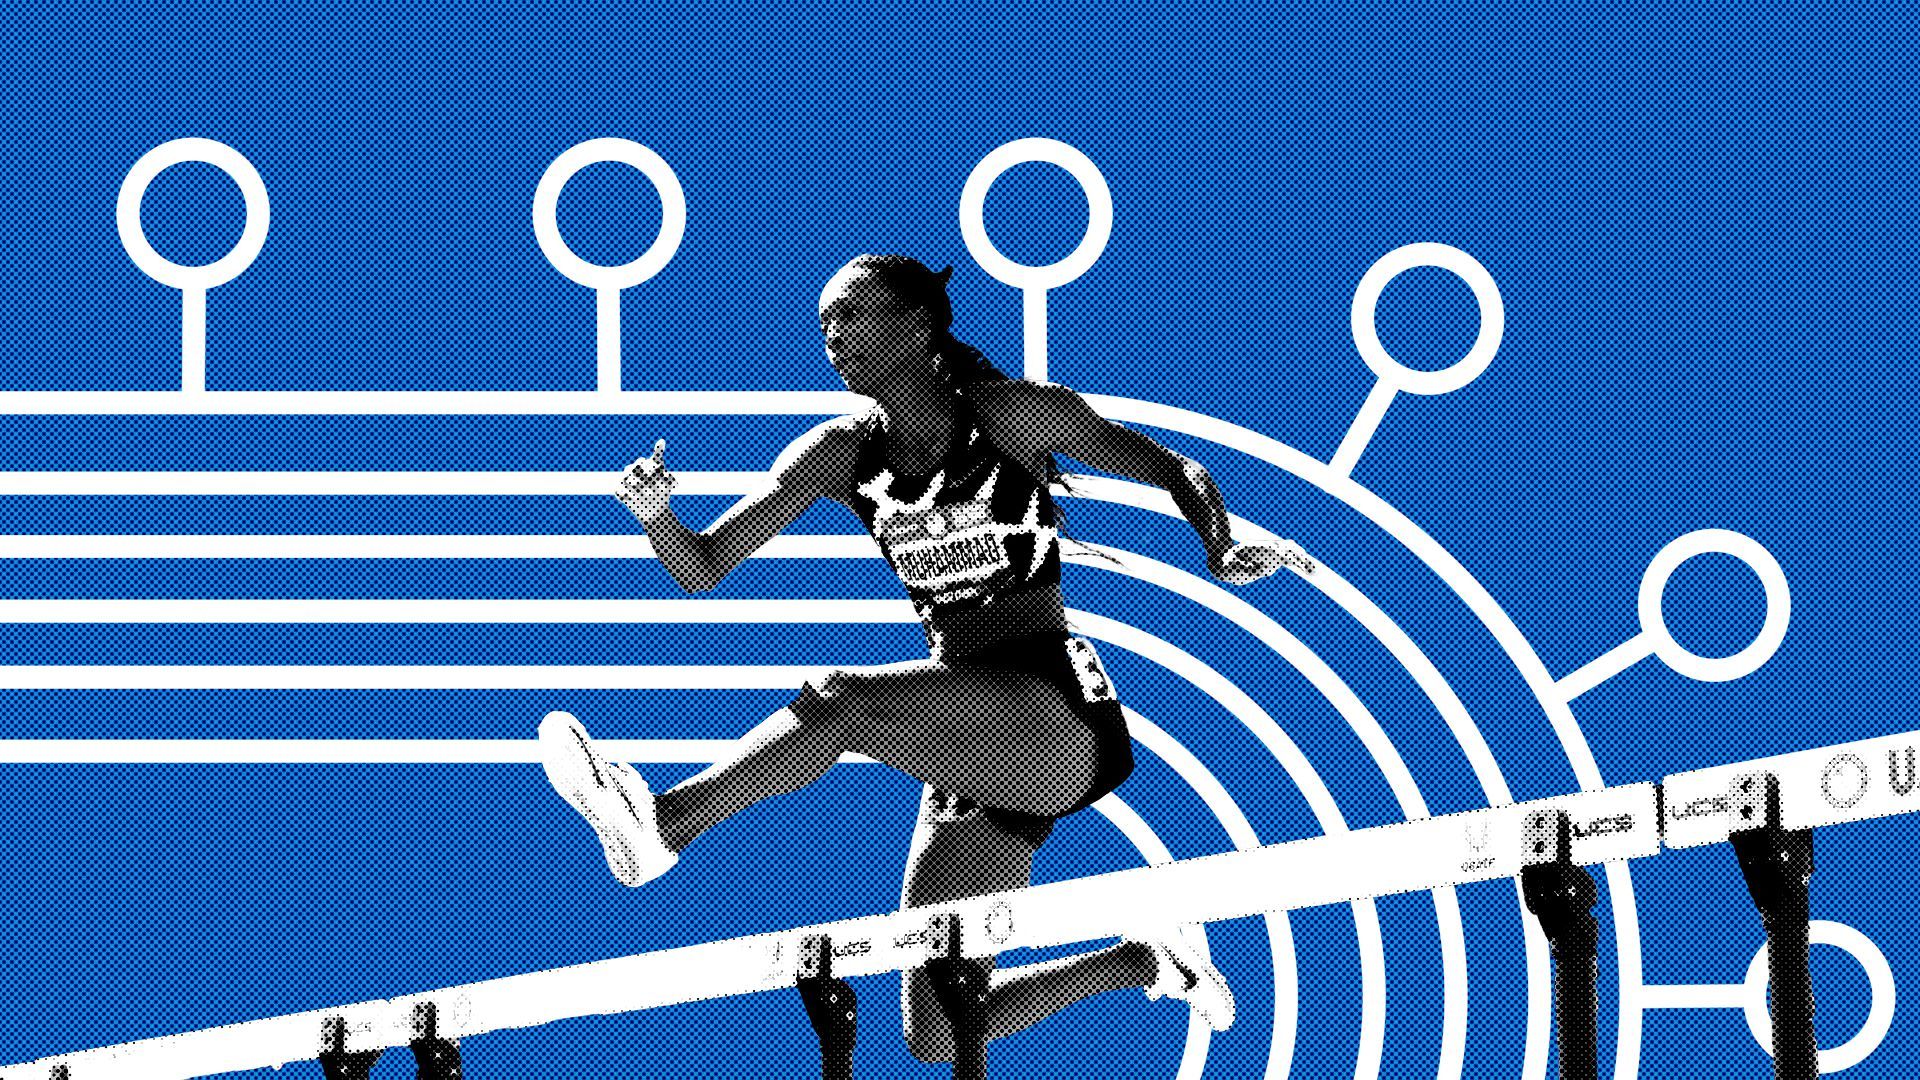 Photo illustration of an Olympic runner jumping a hurdle, over a graphic of a track oval with coronavirus-style protrusions.